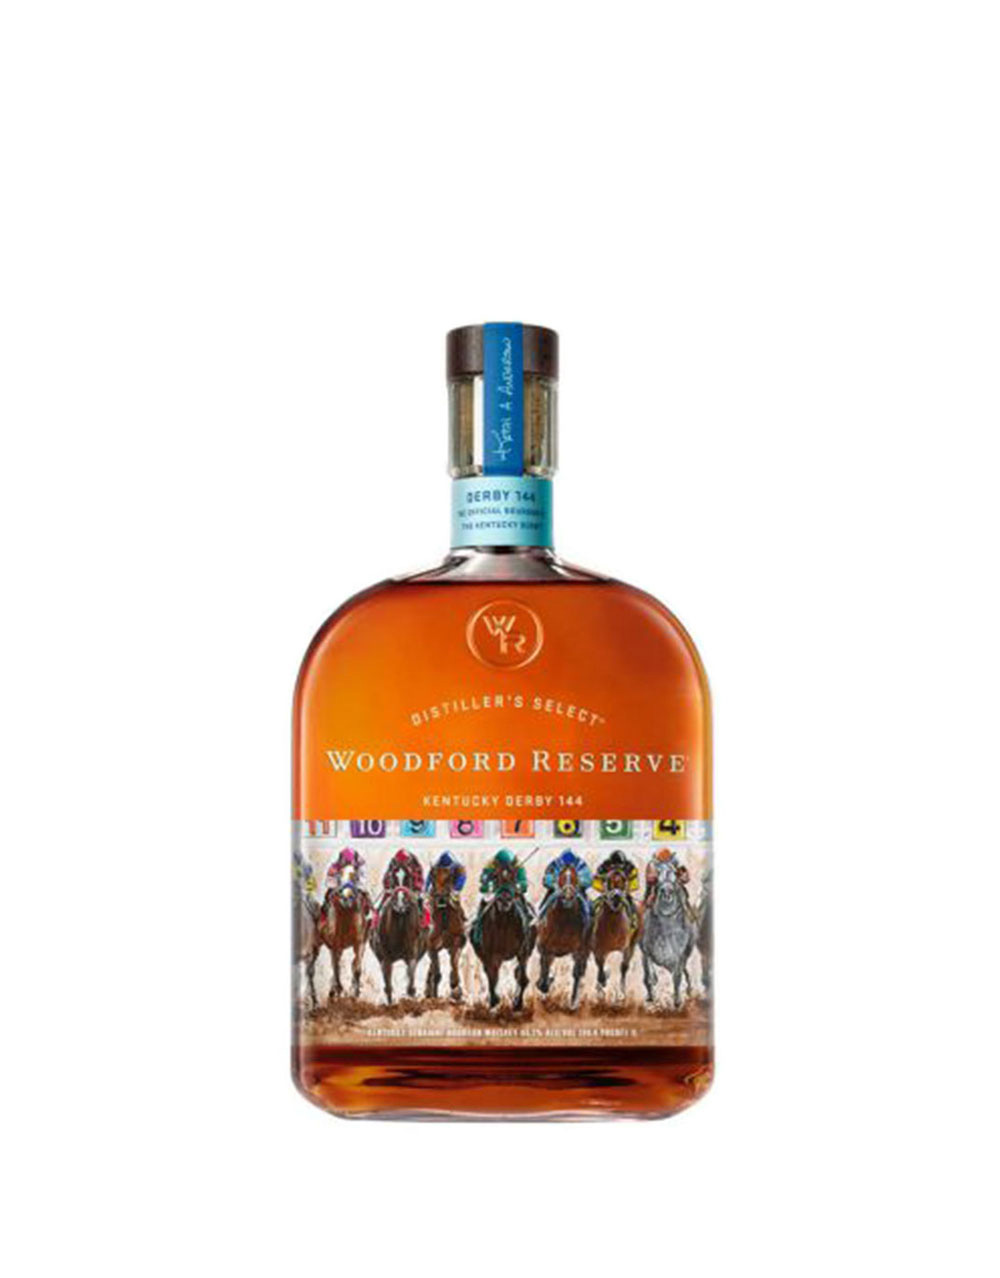 Woodford Reserve Kentucky Derby 144 Limited Edition Bourbon Whiskey